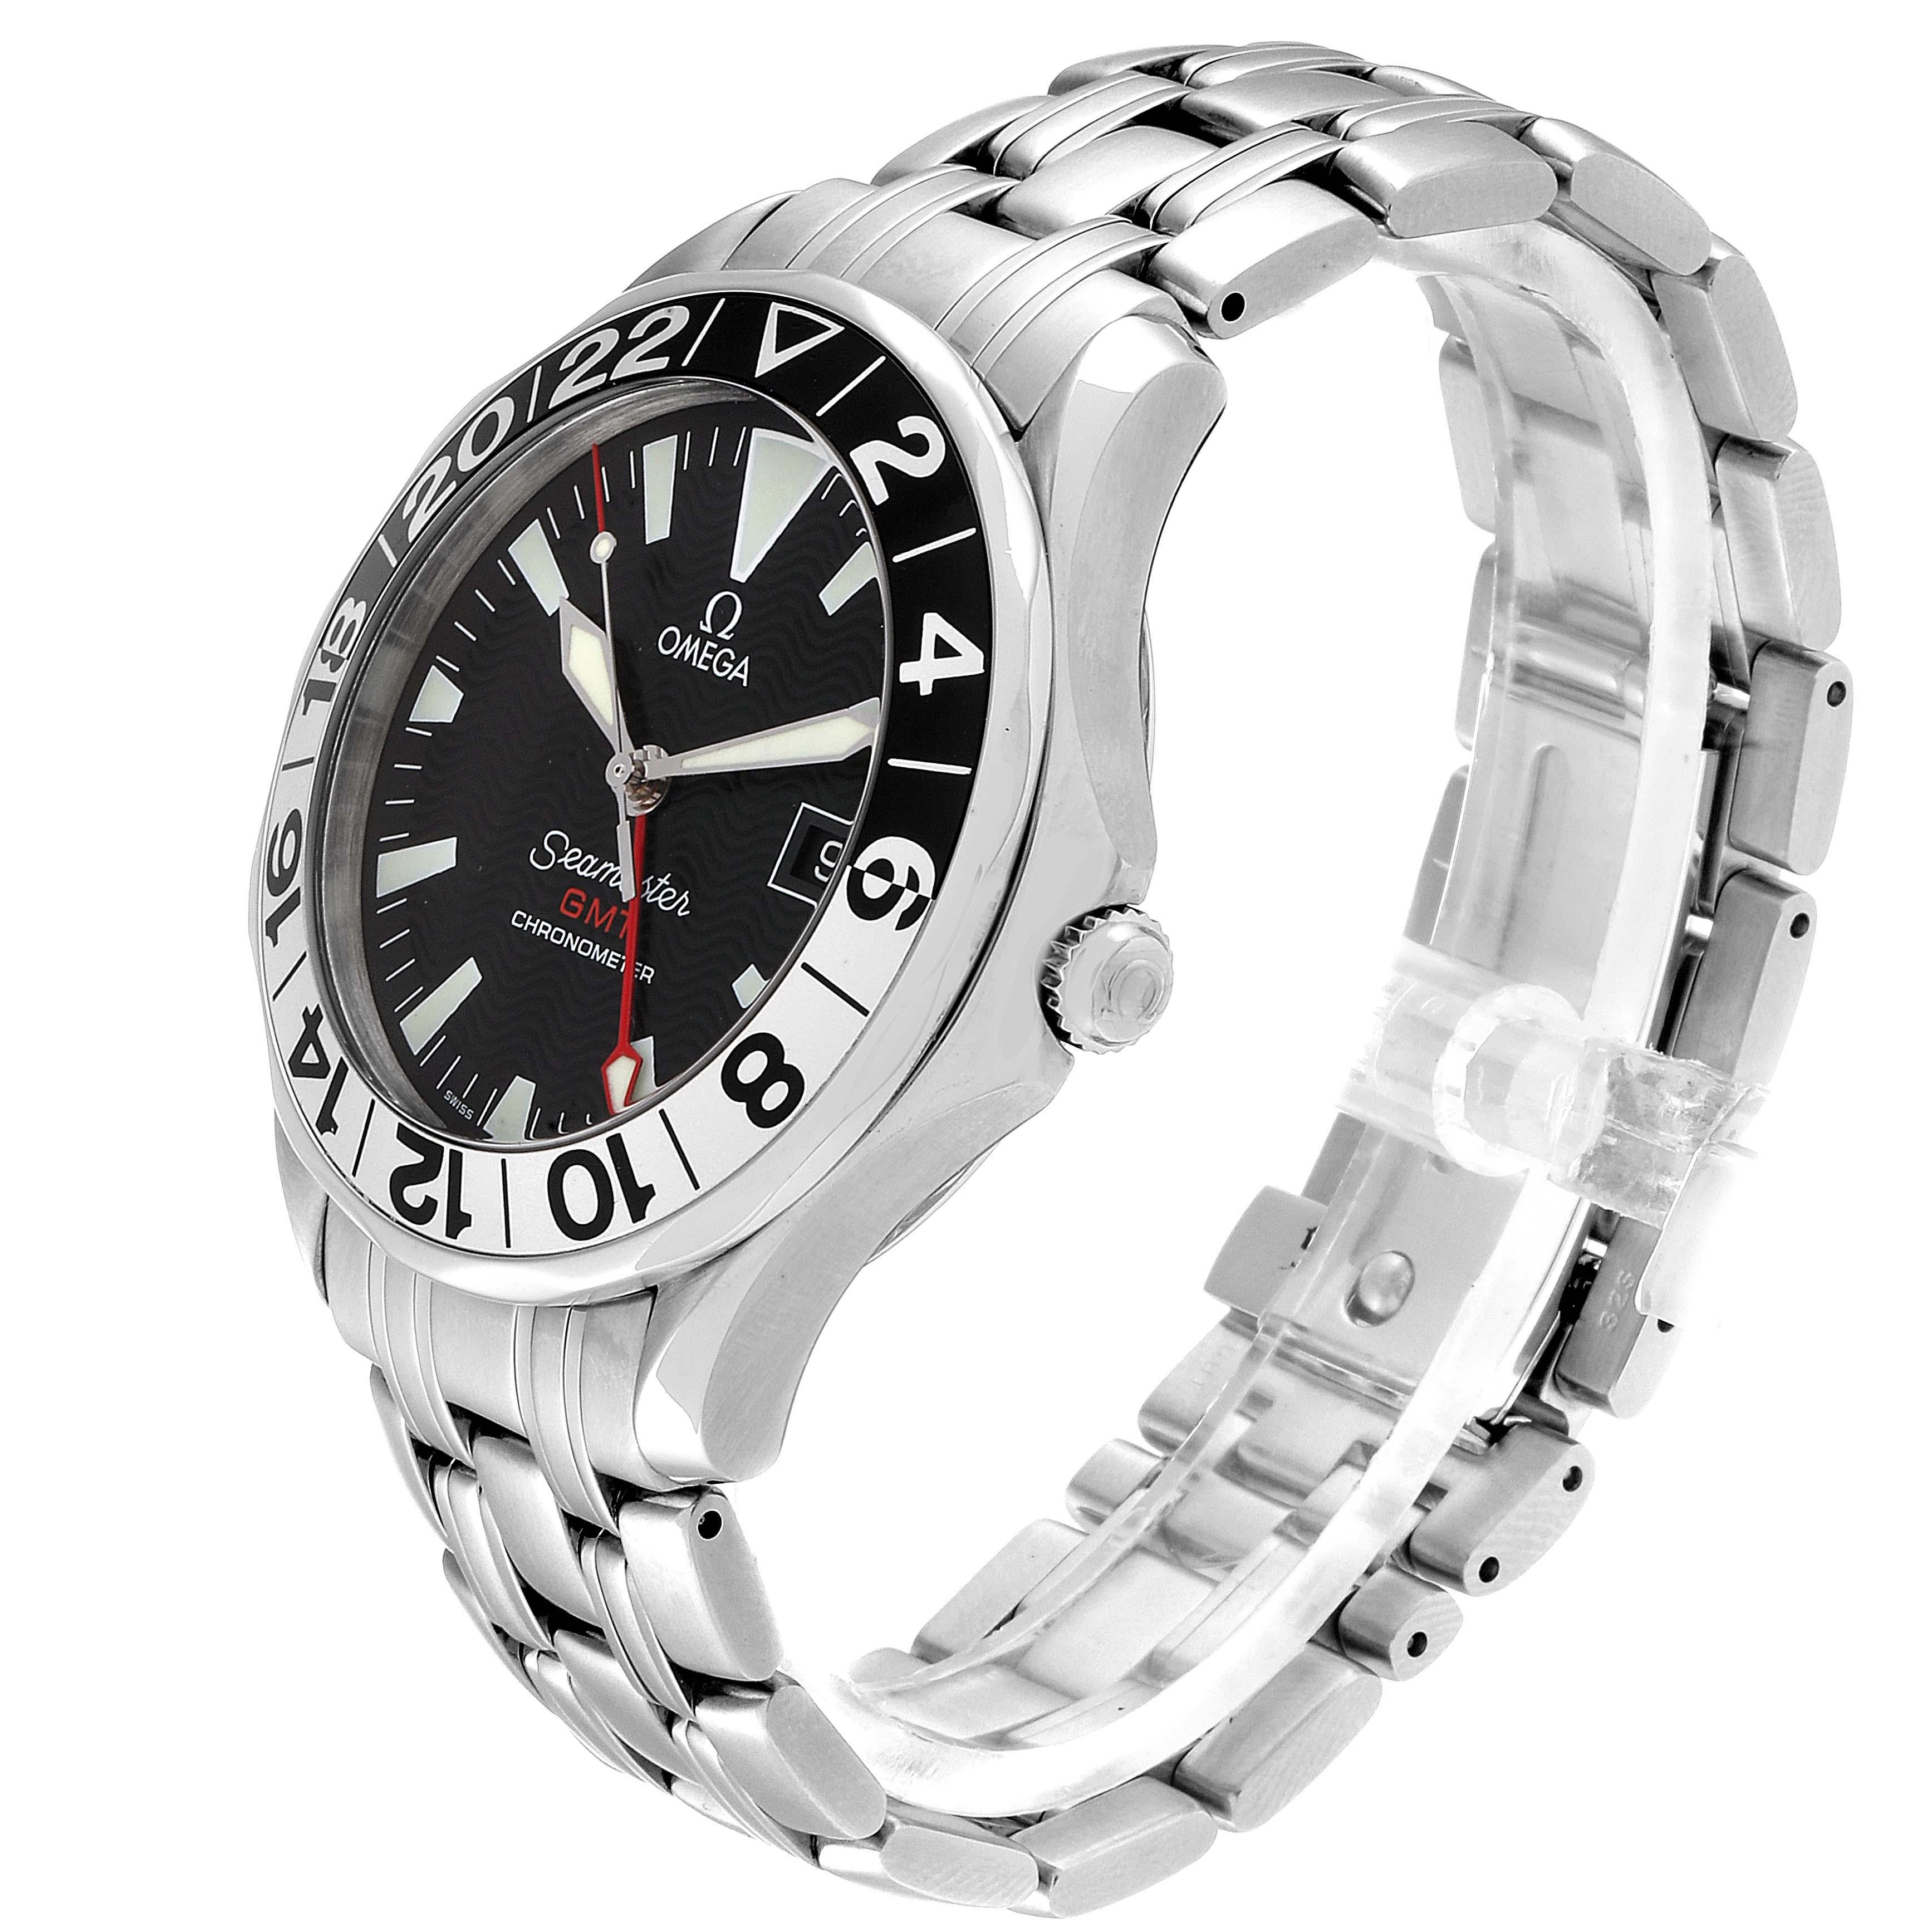 Omega Seamaster GMT 50th Anniversary Steel Men's Watch 2534.50.00 For Sale 1